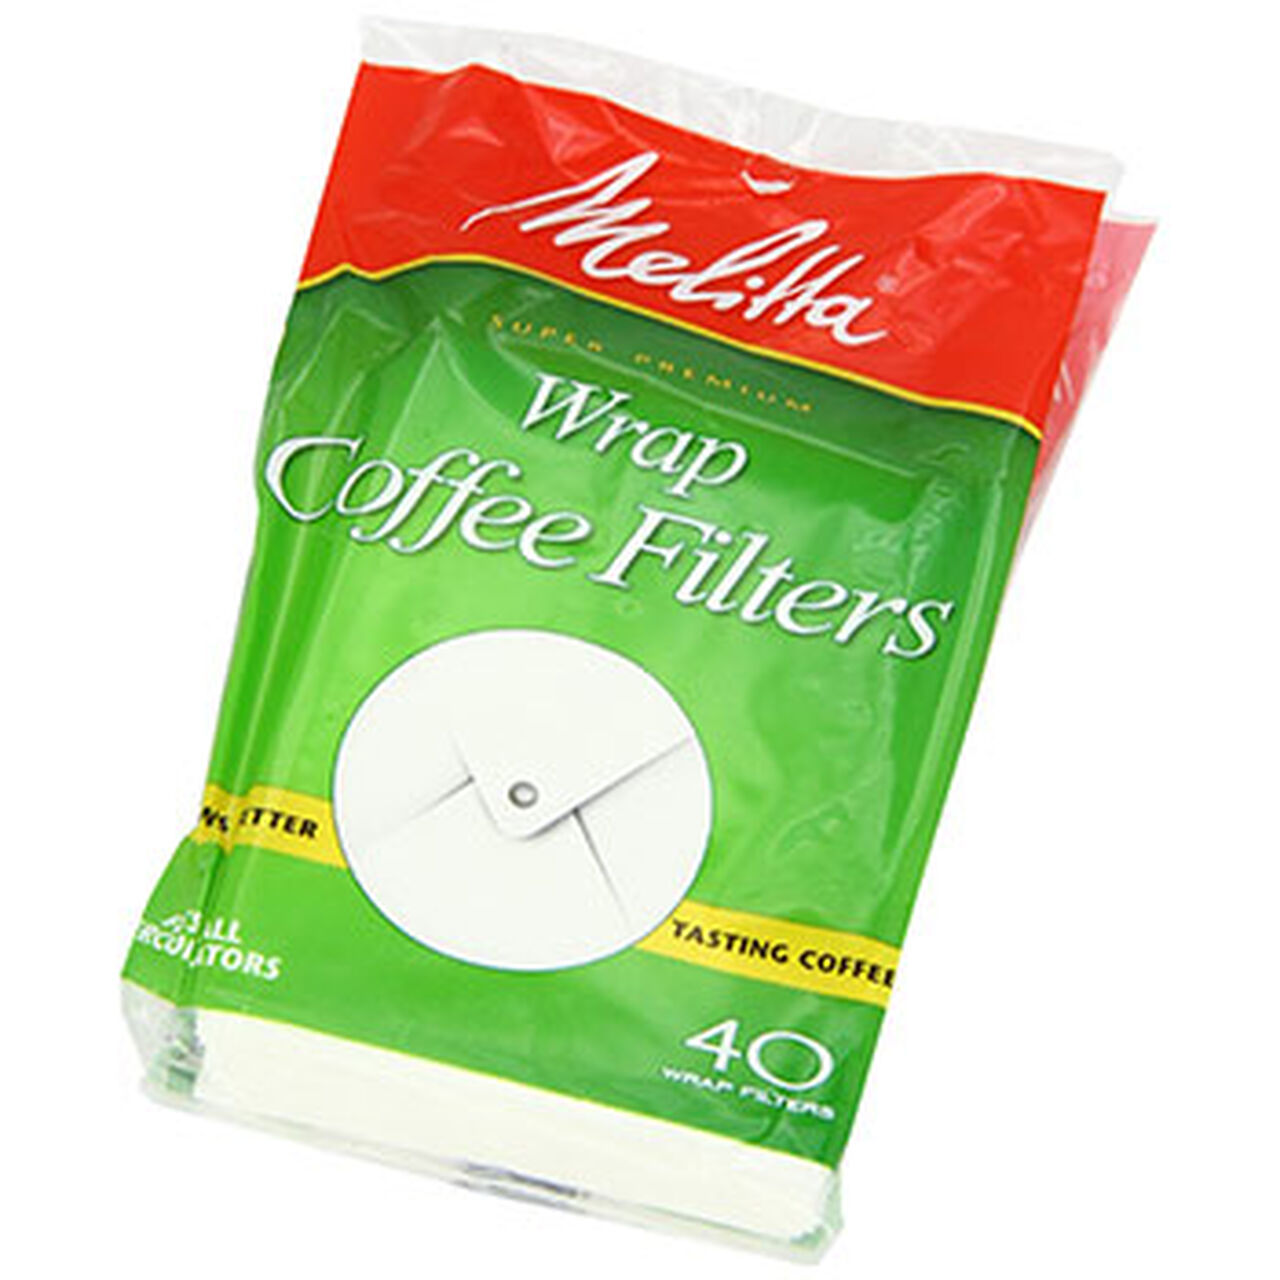 Melitta Wrap Coffee Filters - (40ct.), , large image number 0